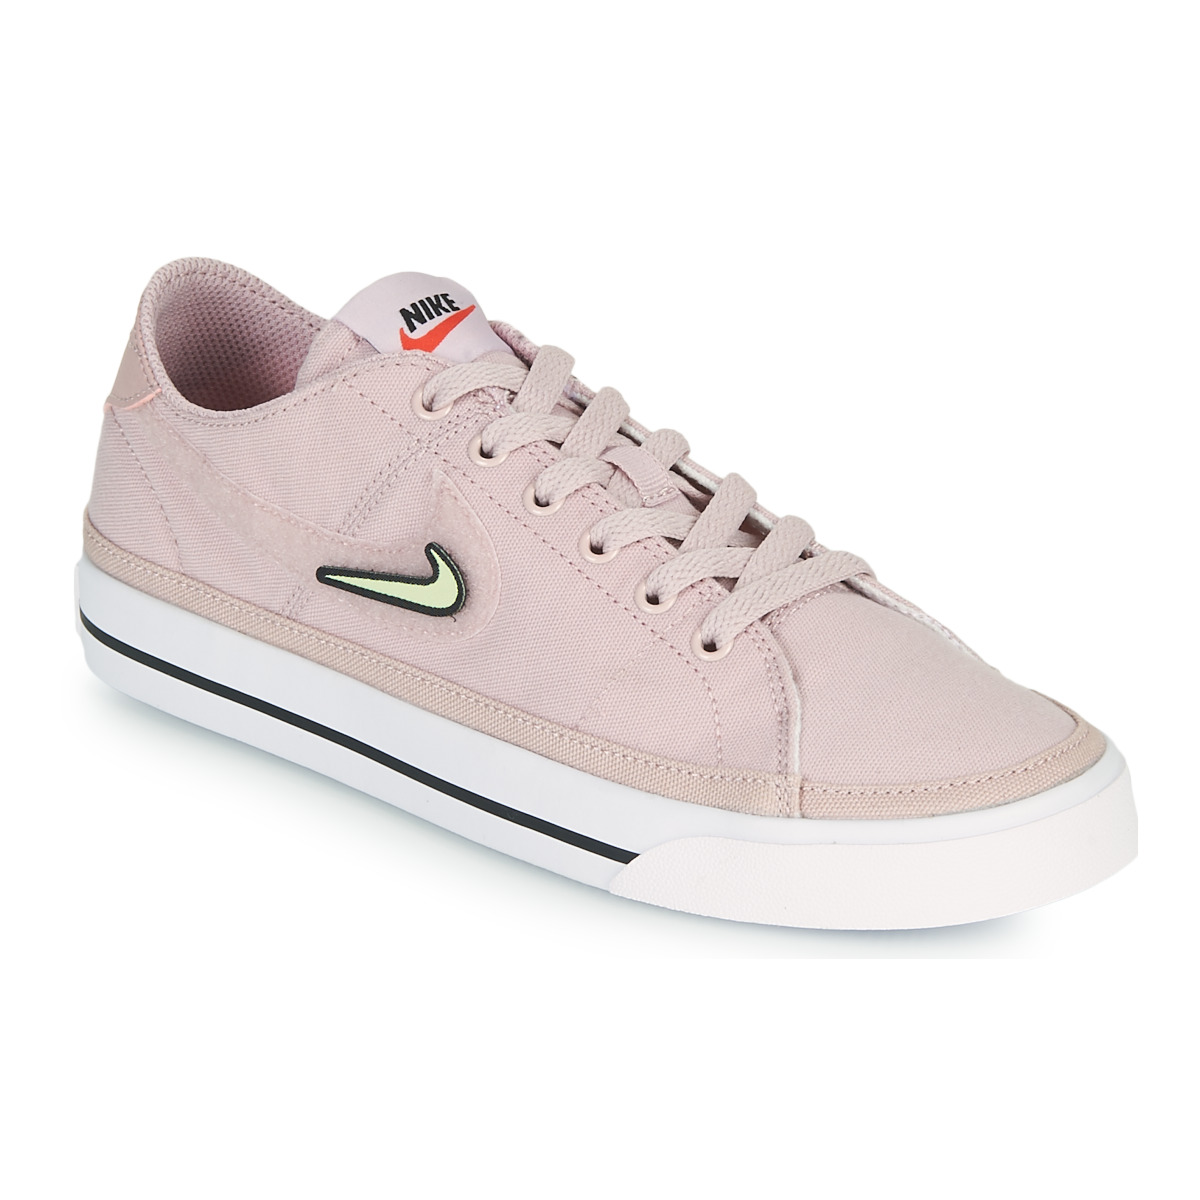 Scarpe Donna Sneakers basse Nike COURT LEGACY VALENTINE'S DAY 